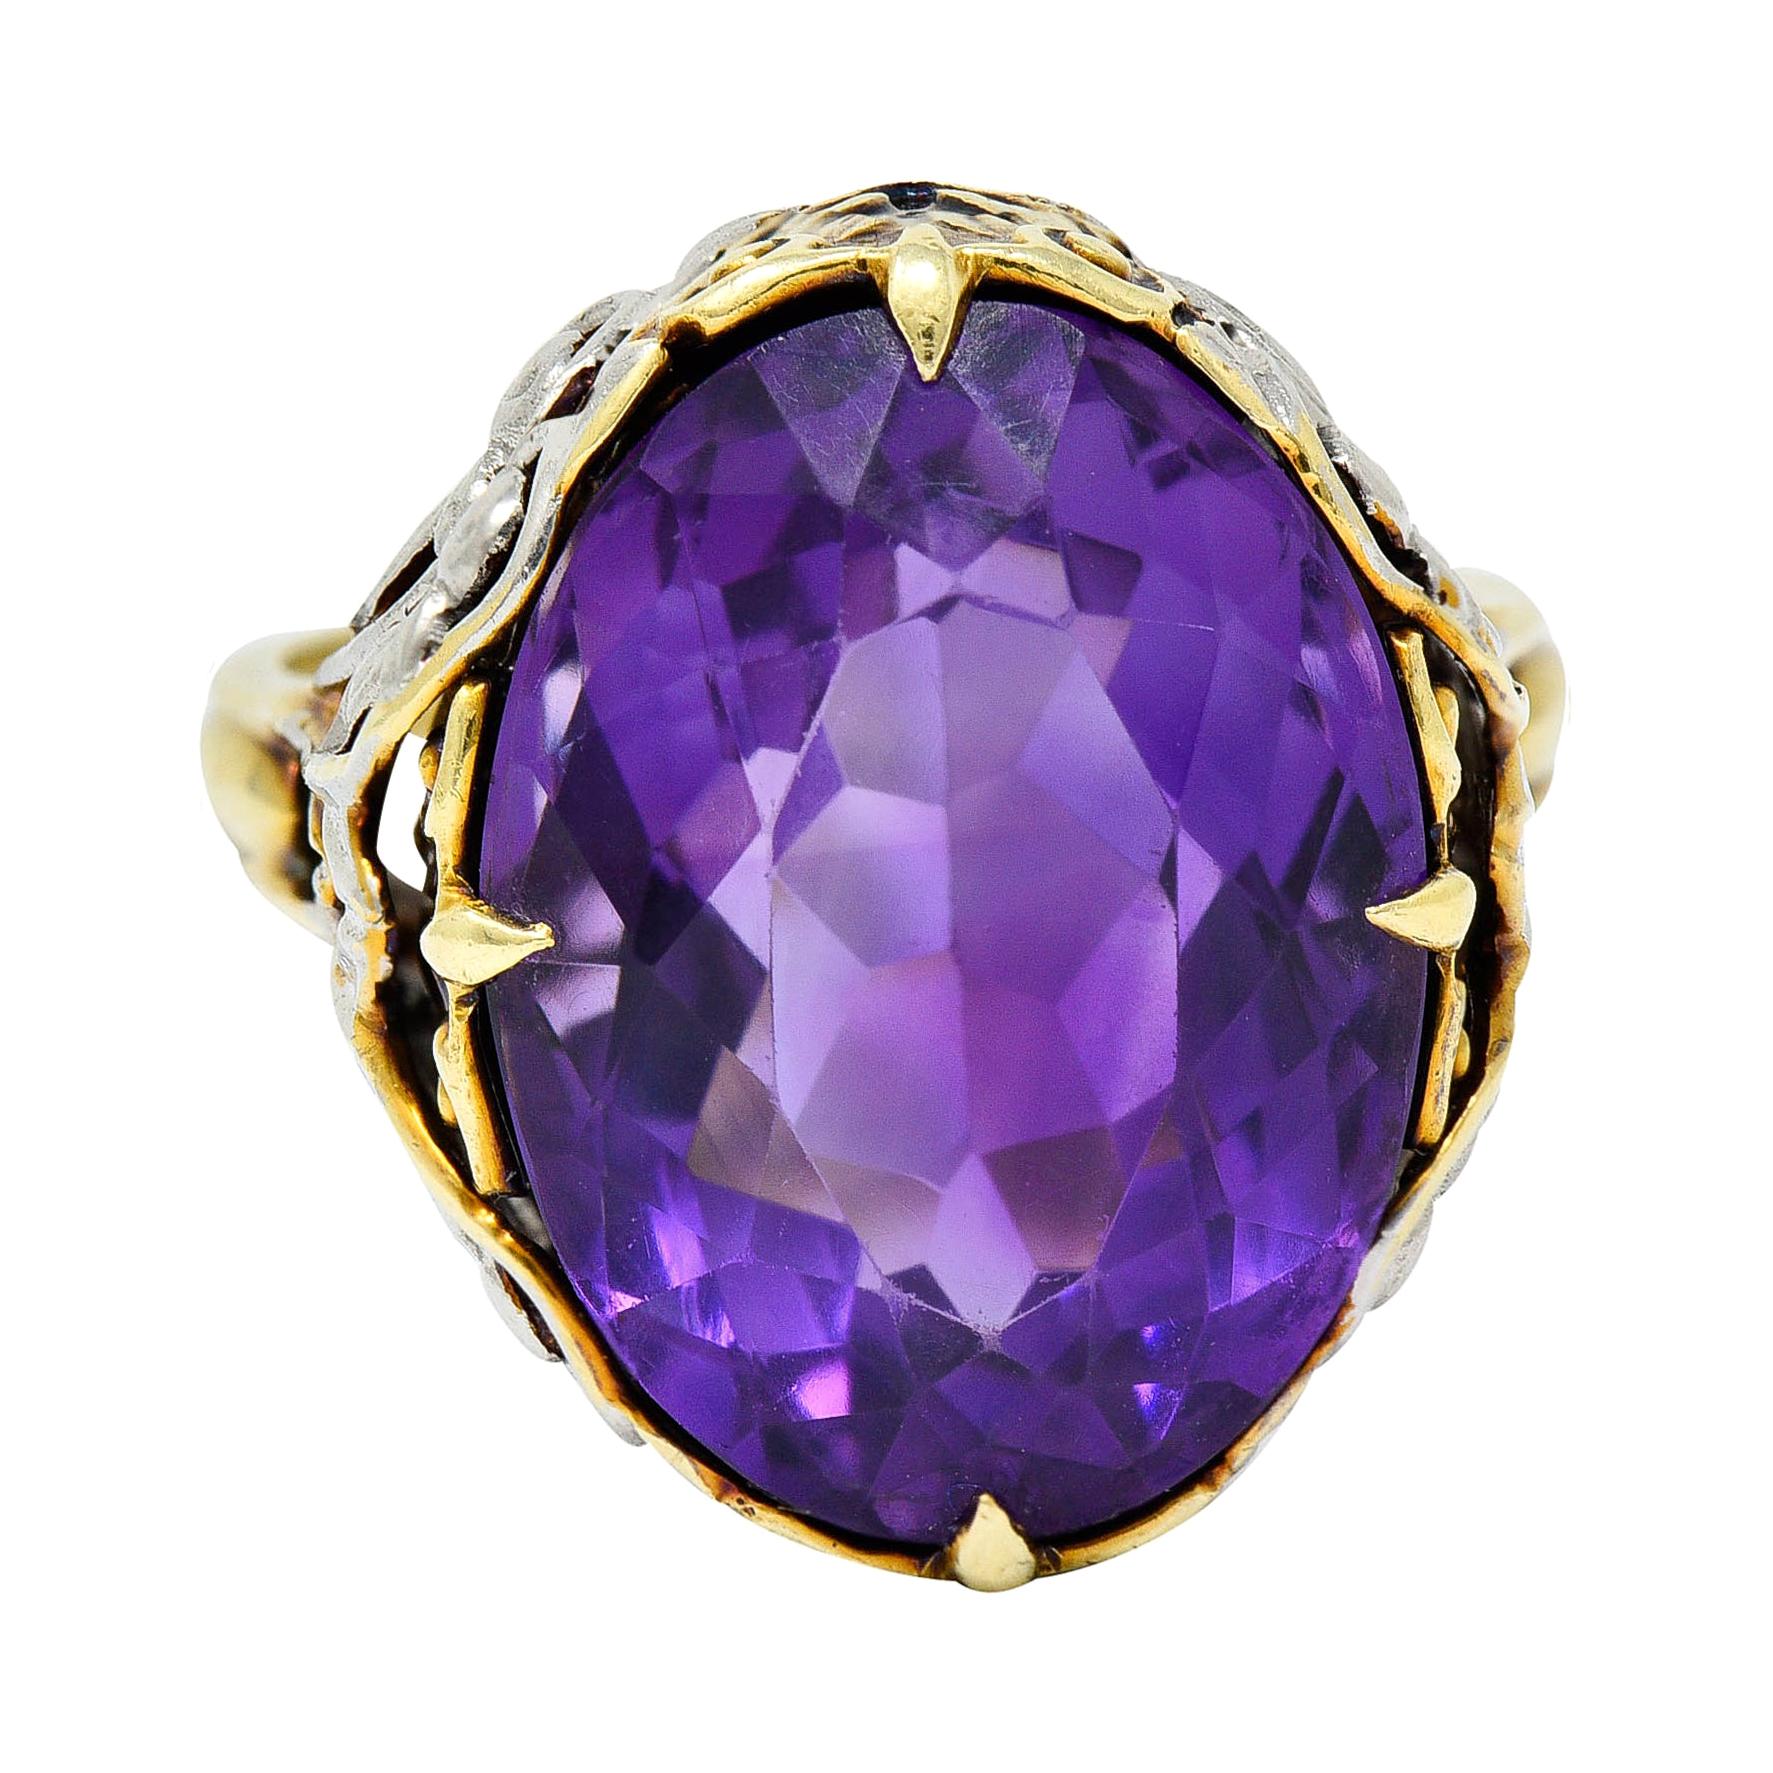 Exquisite Antique Amethyst and Two-Colored 14 Karat Gold Ring For Sale ...